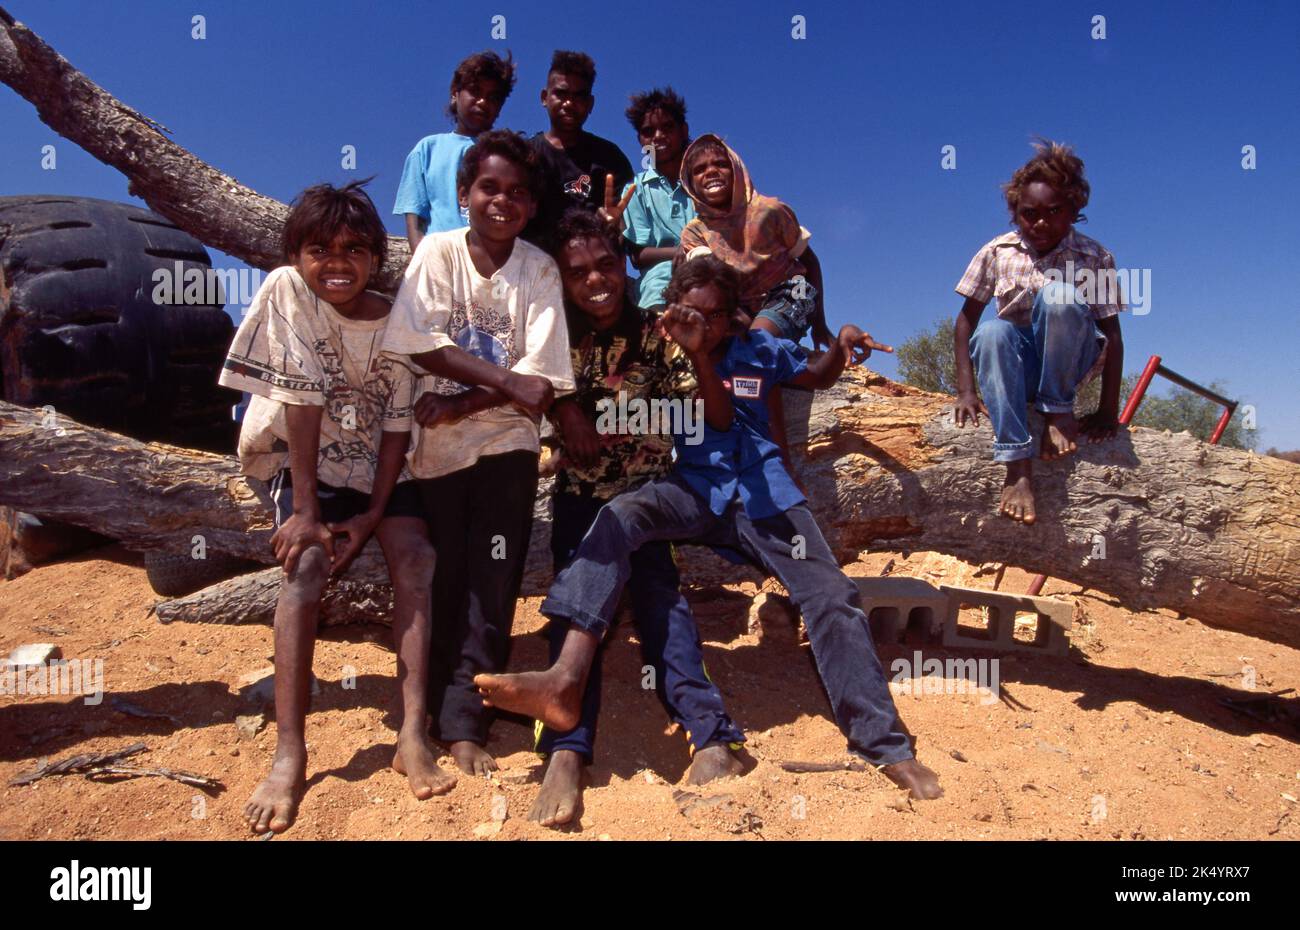 GROUP OF HAPPY YOUNG INDIGENOUS TEENAGERS AND YOUNGER BOYS, YUWELAMU, NORTHERN TERRITORY. Stock Photo